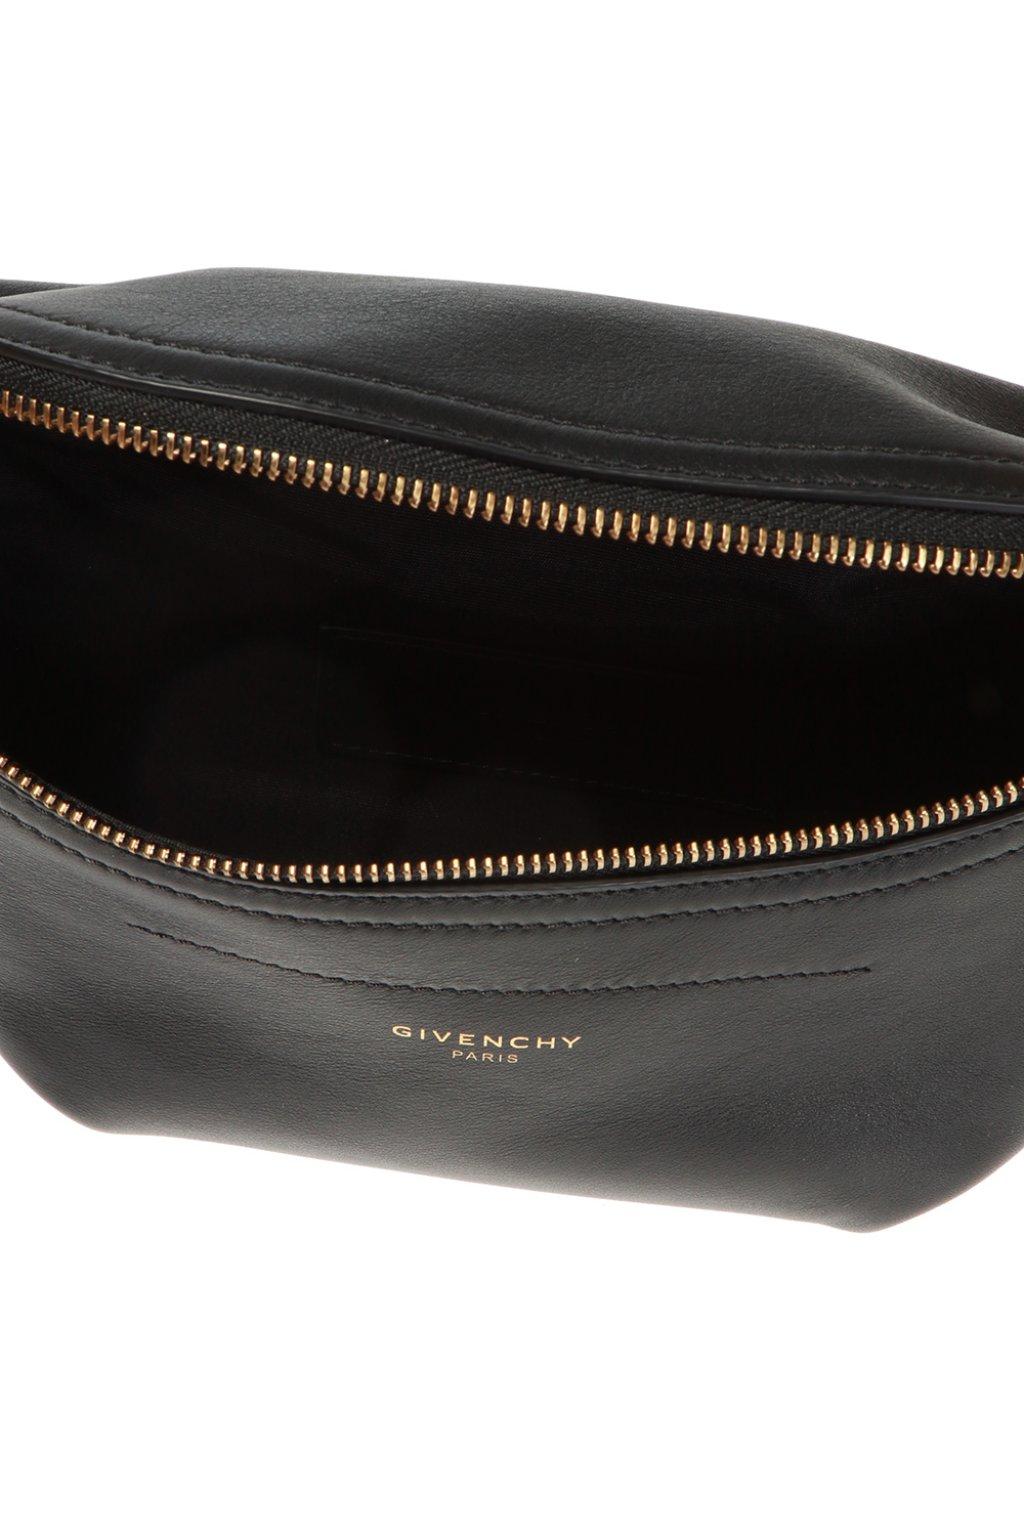 Givenchy Leather Belt Bag With Logo in Black - Lyst